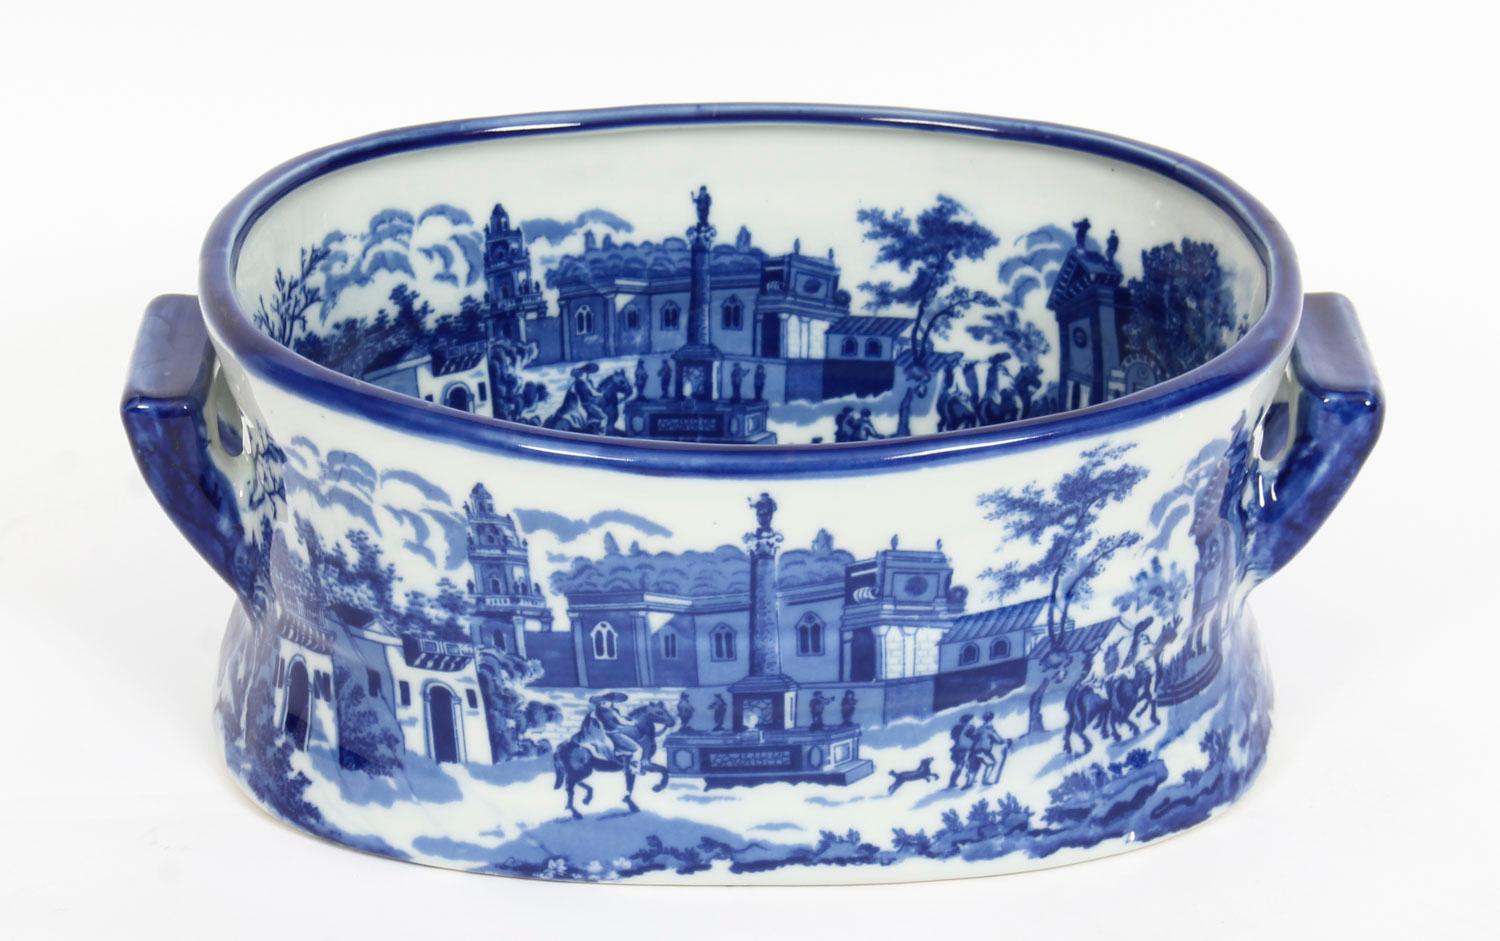 This is a delightful decorative blue and white ironstone china planter which will look fabulous with plants and flowers but is also ideal for keeping newspapers and magazines.

Bearing a printed mark on the base that reads 